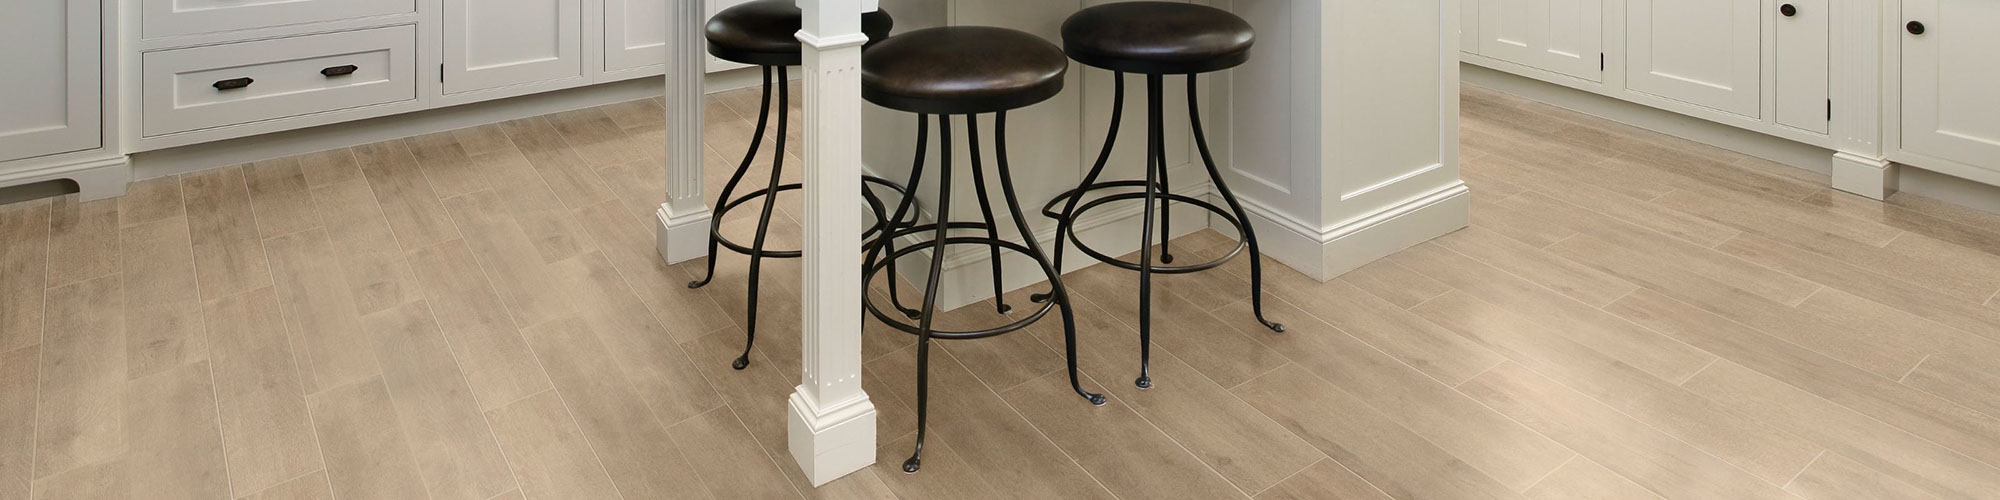 Eat-in kitchen with island with white base, floor tile that looks like blonde wood flooring, brown leather & black metal bar stools.